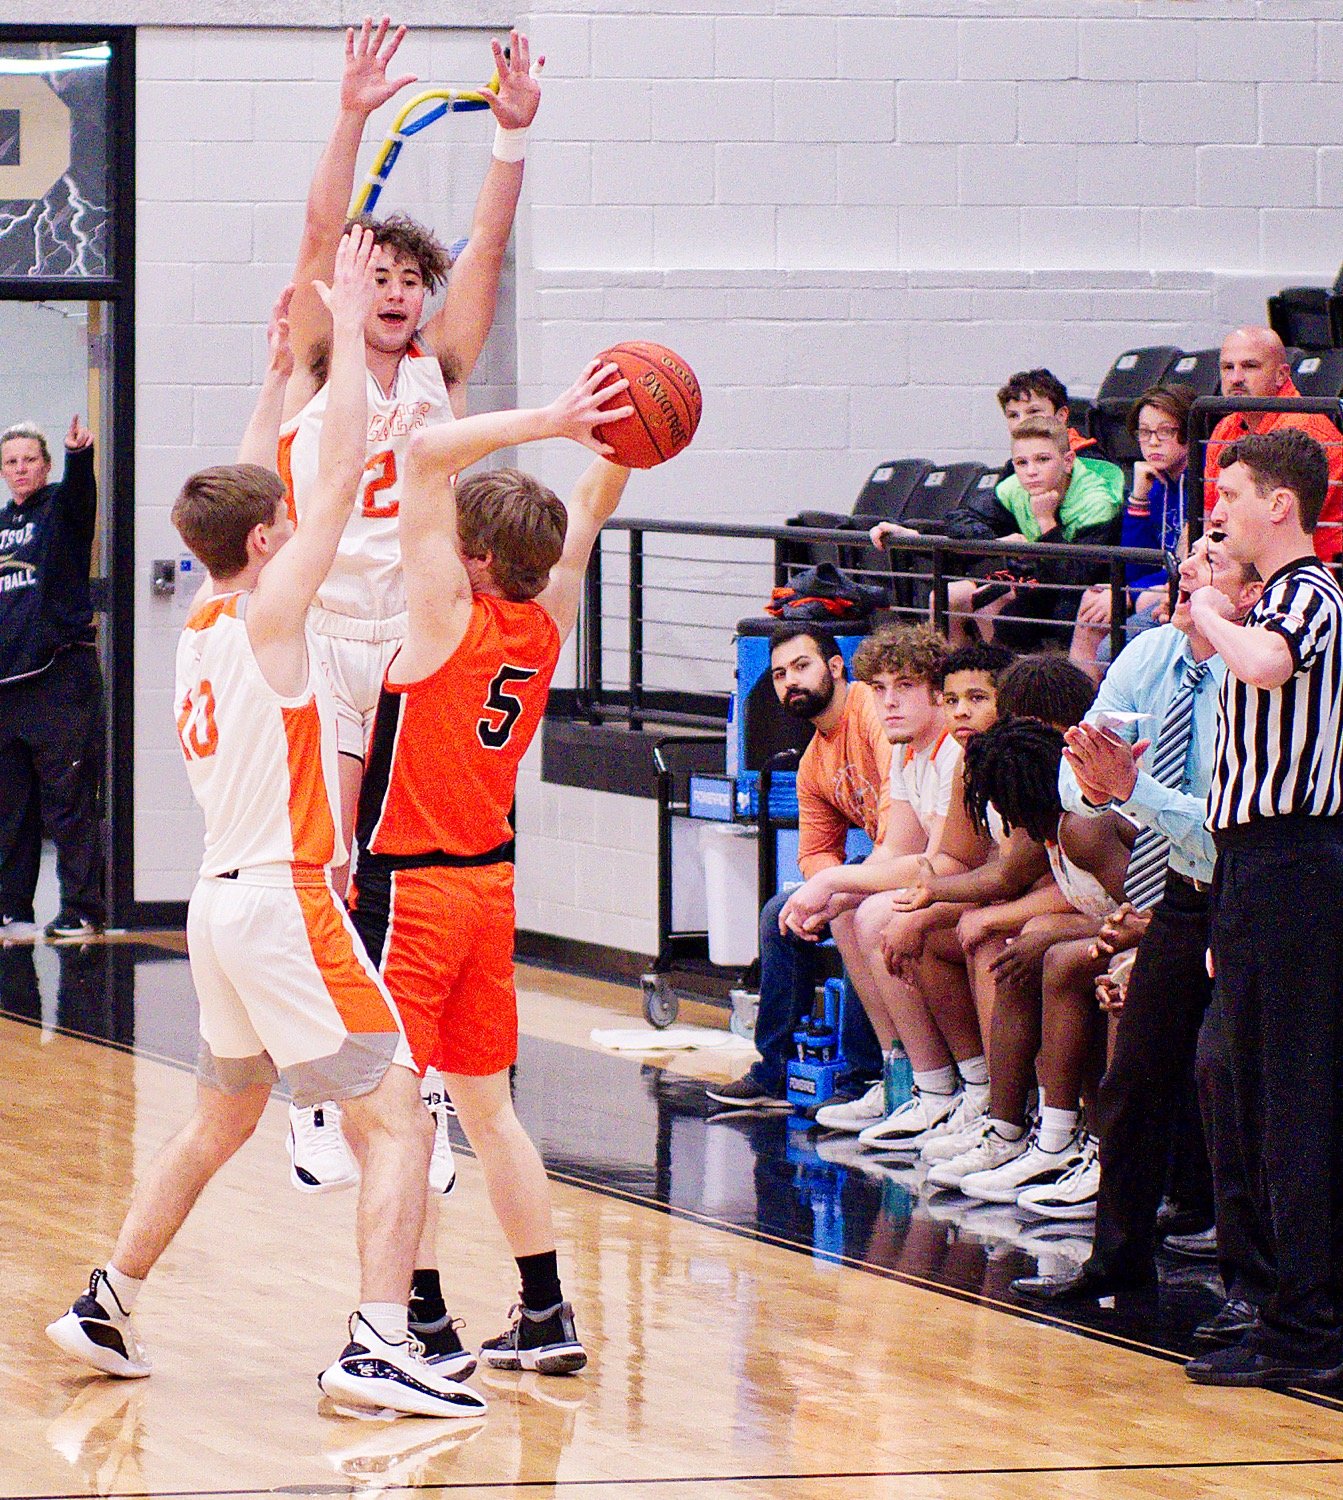 Hunter Vandover and T.J. Moreland trap the DeKalb ball handler in the halfcourt. [more hoops highlights here]